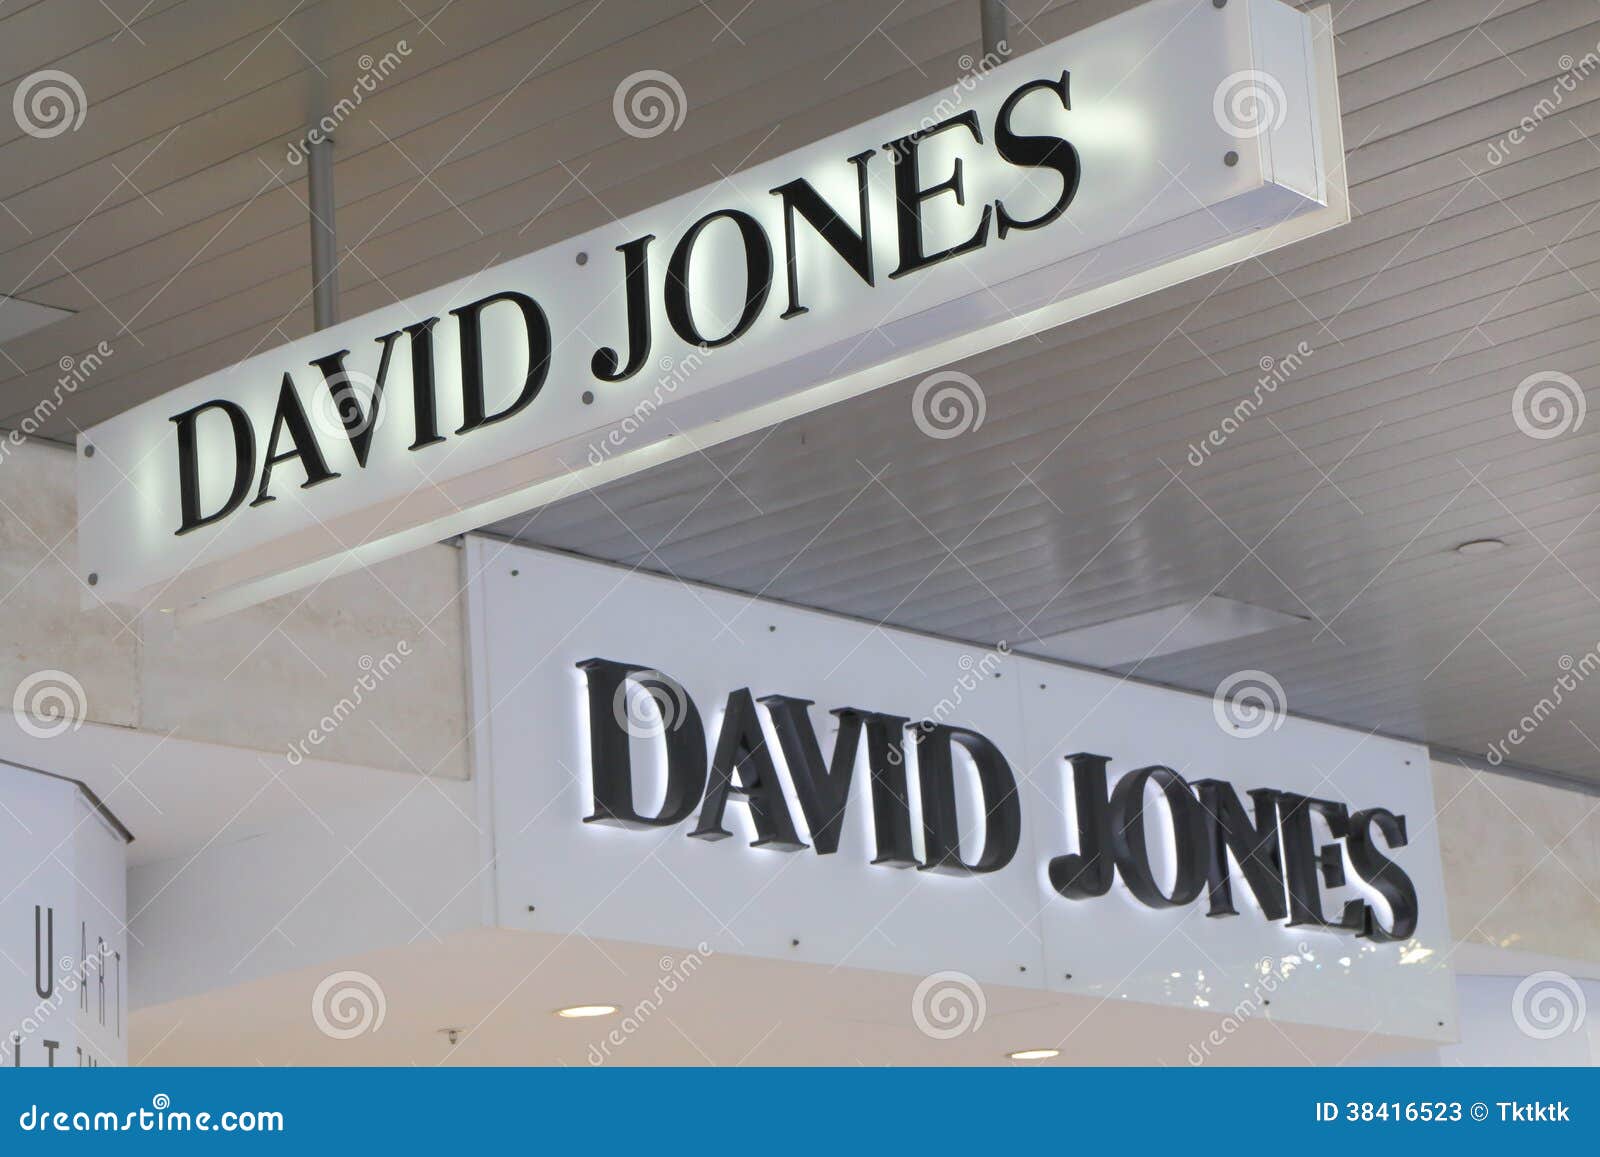 David Jones Store Royalty-Free Images, Stock Photos & Pictures